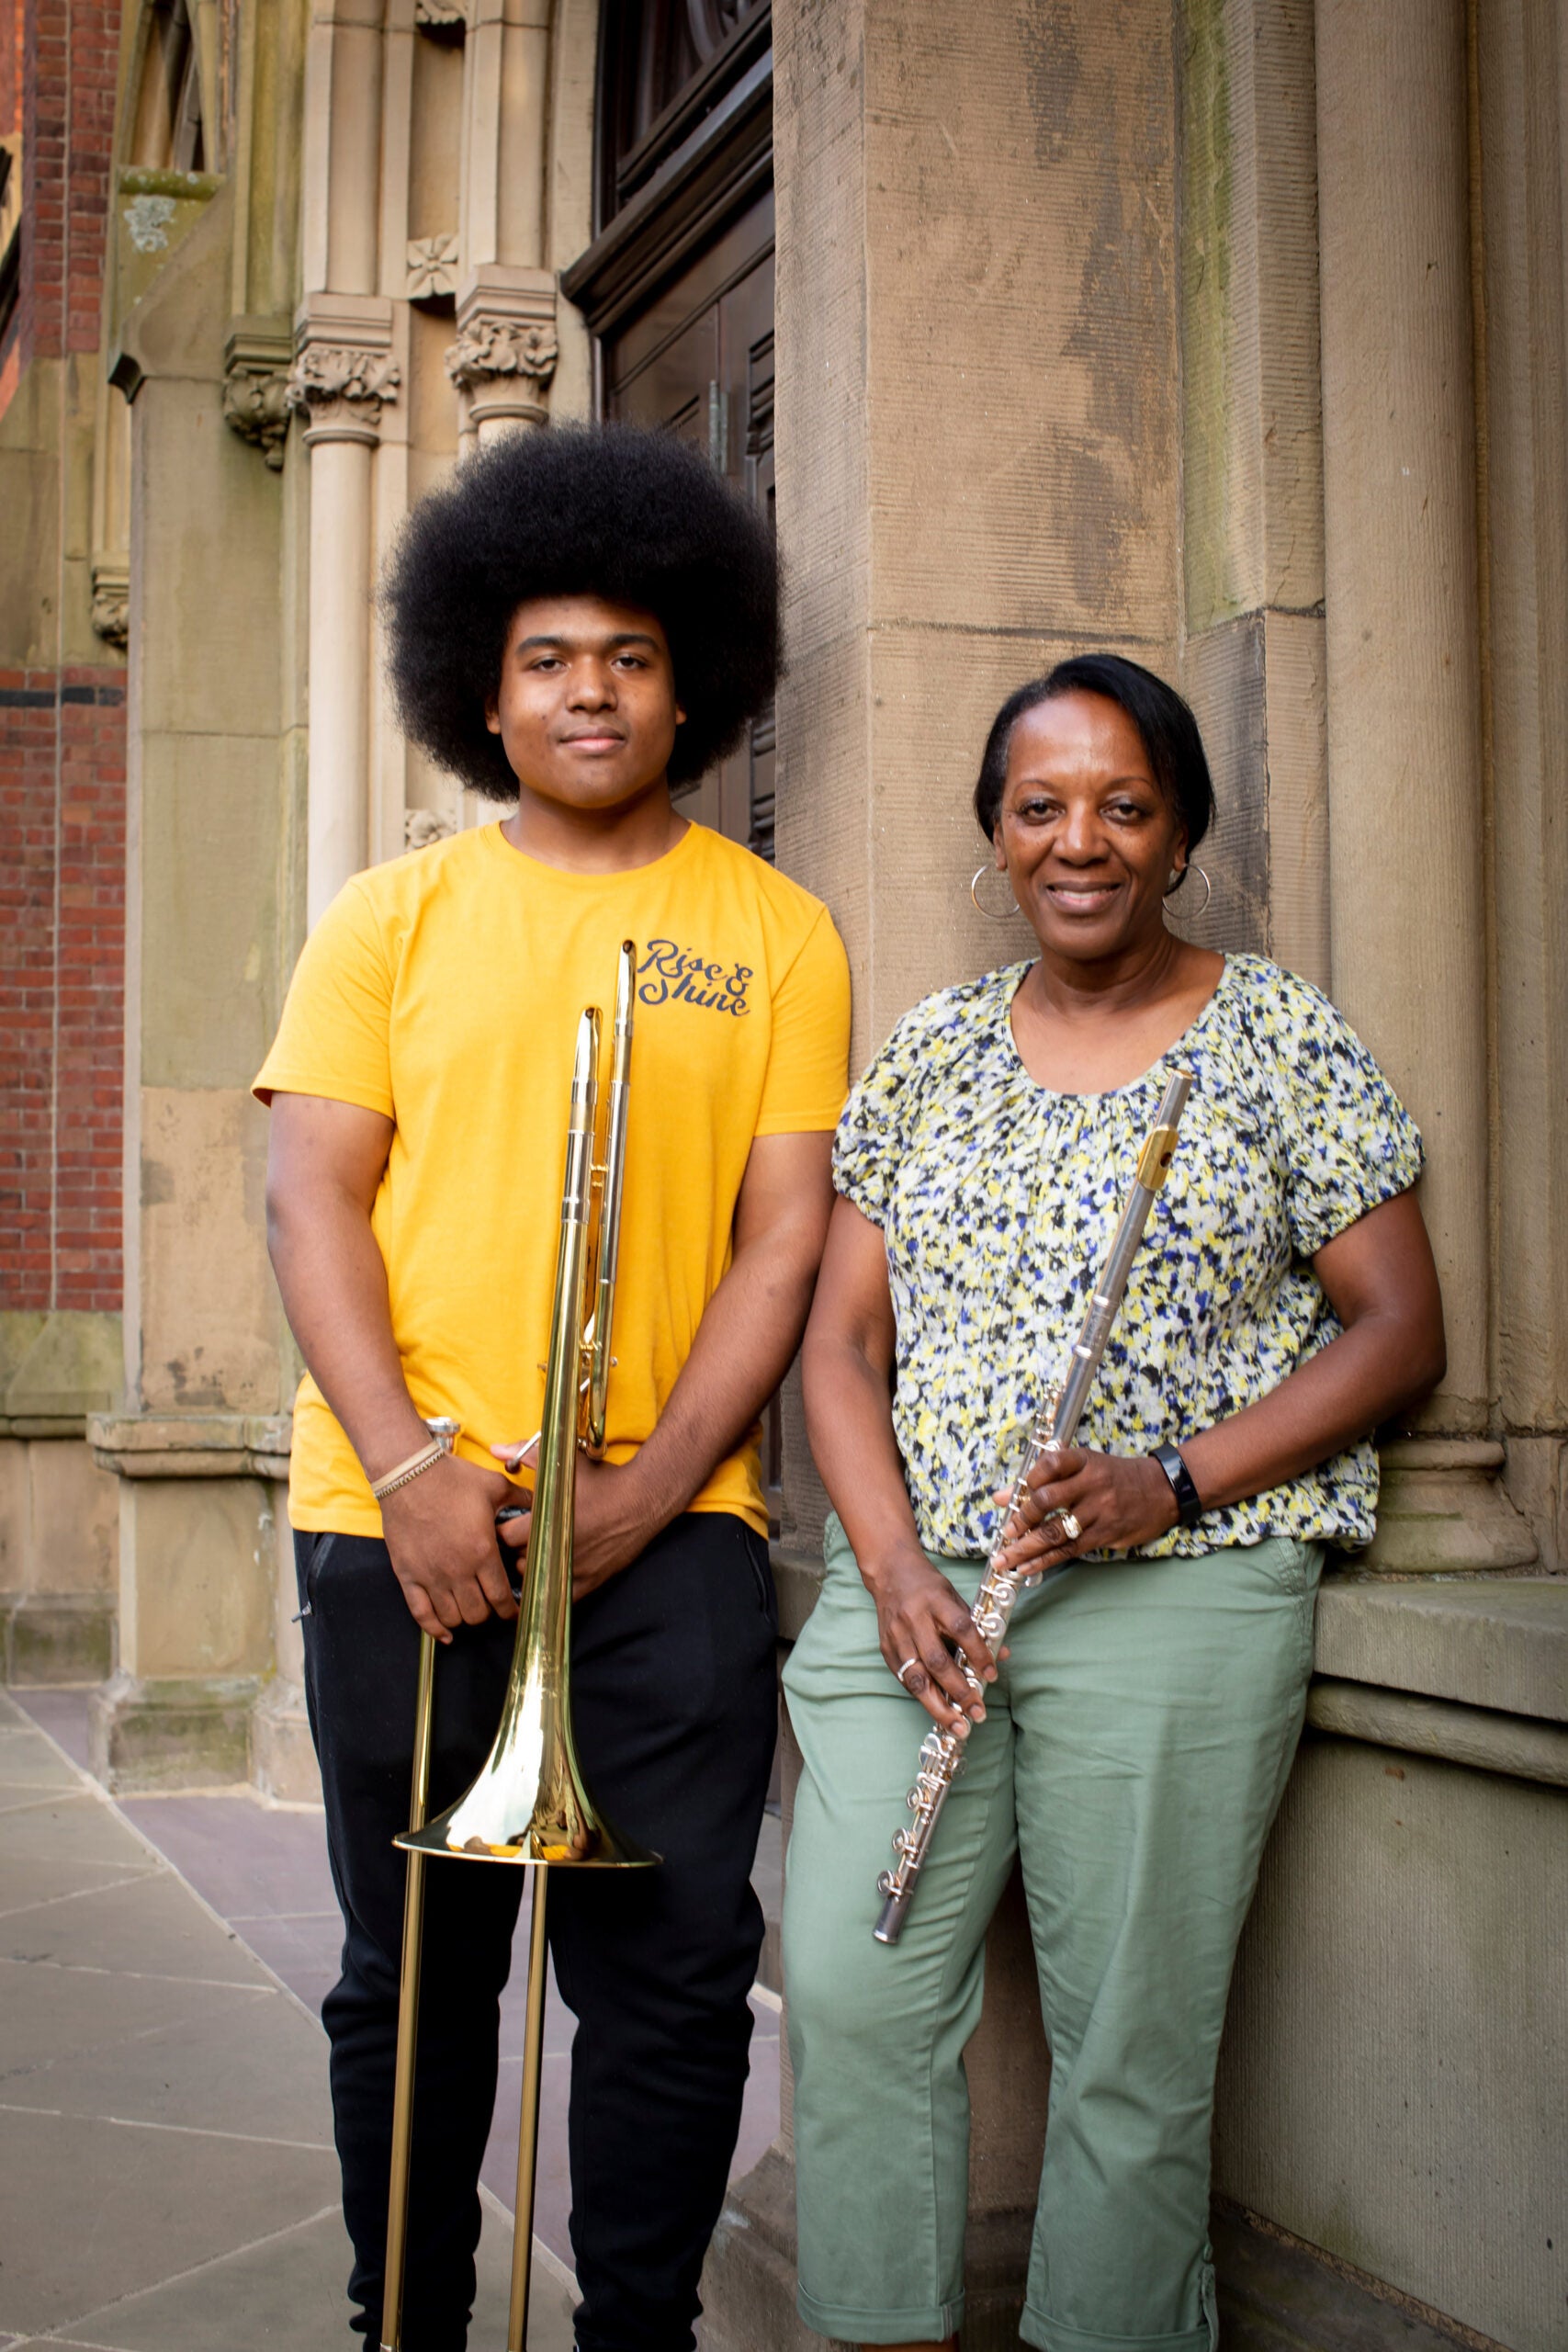 Lewis Bryant and his mother, Helen Bryant play trombone and flute